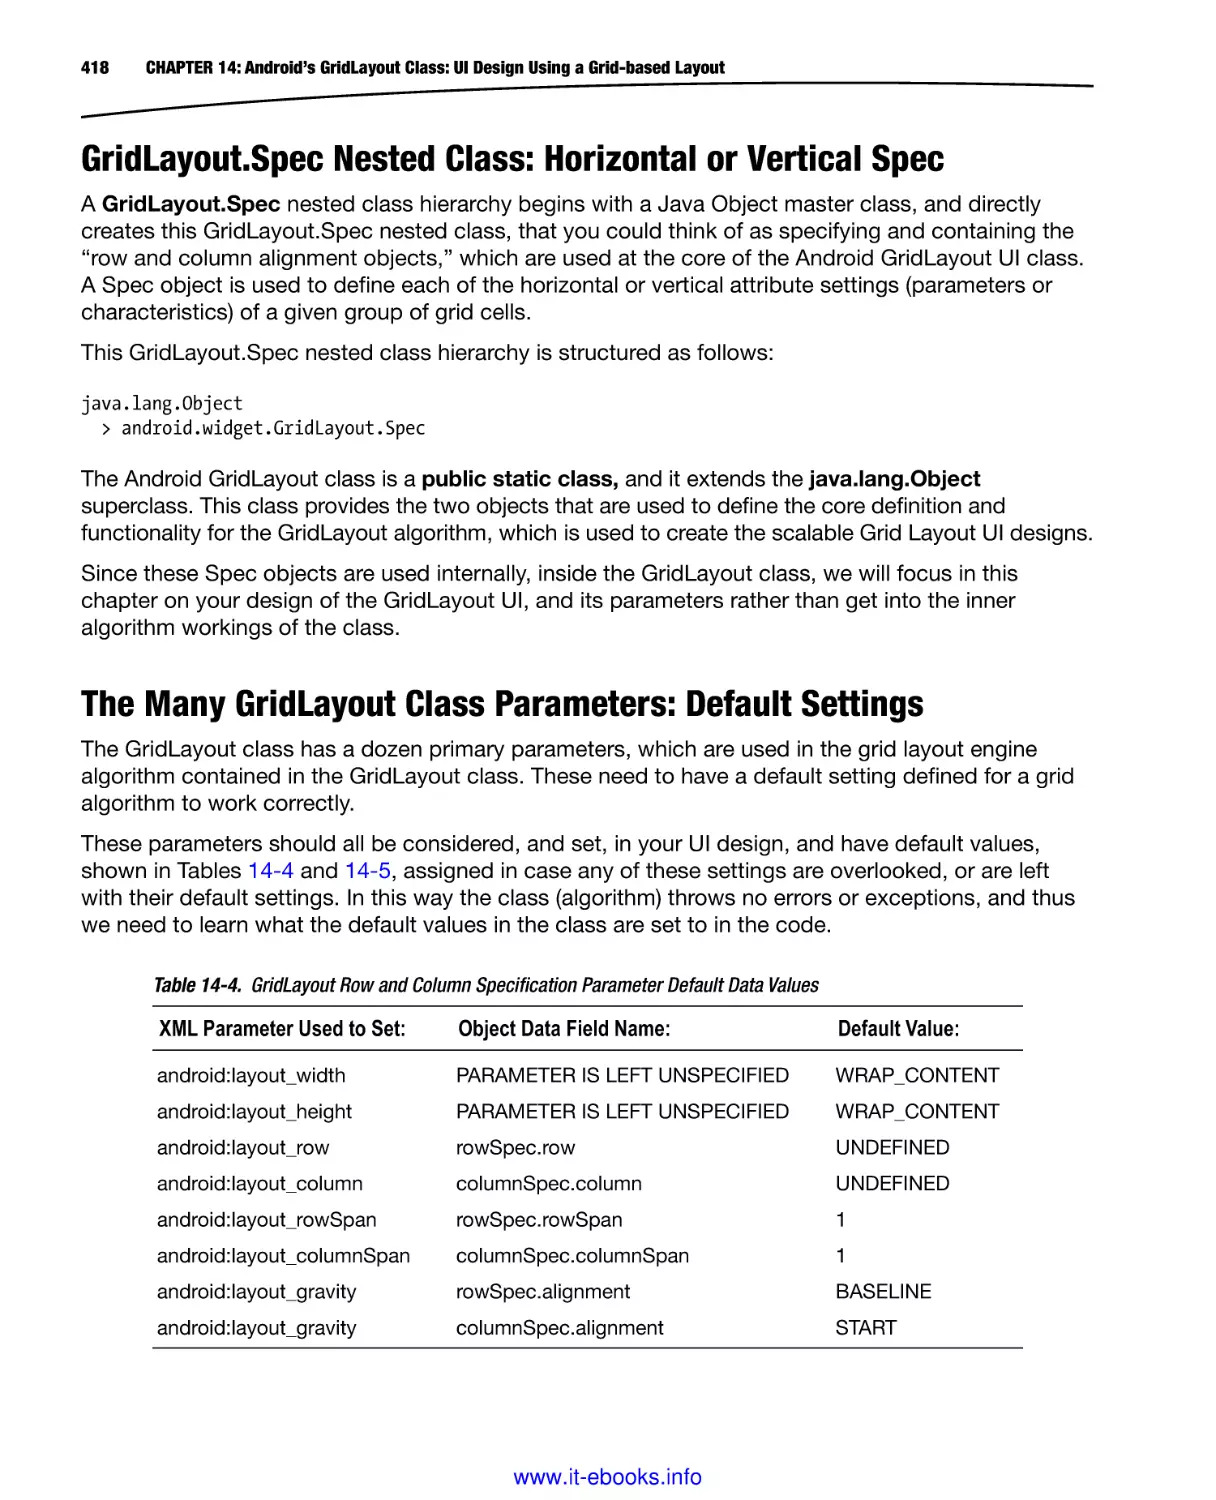 GridLayout.Spec Nested Class
The Many GridLayout Class Parameters